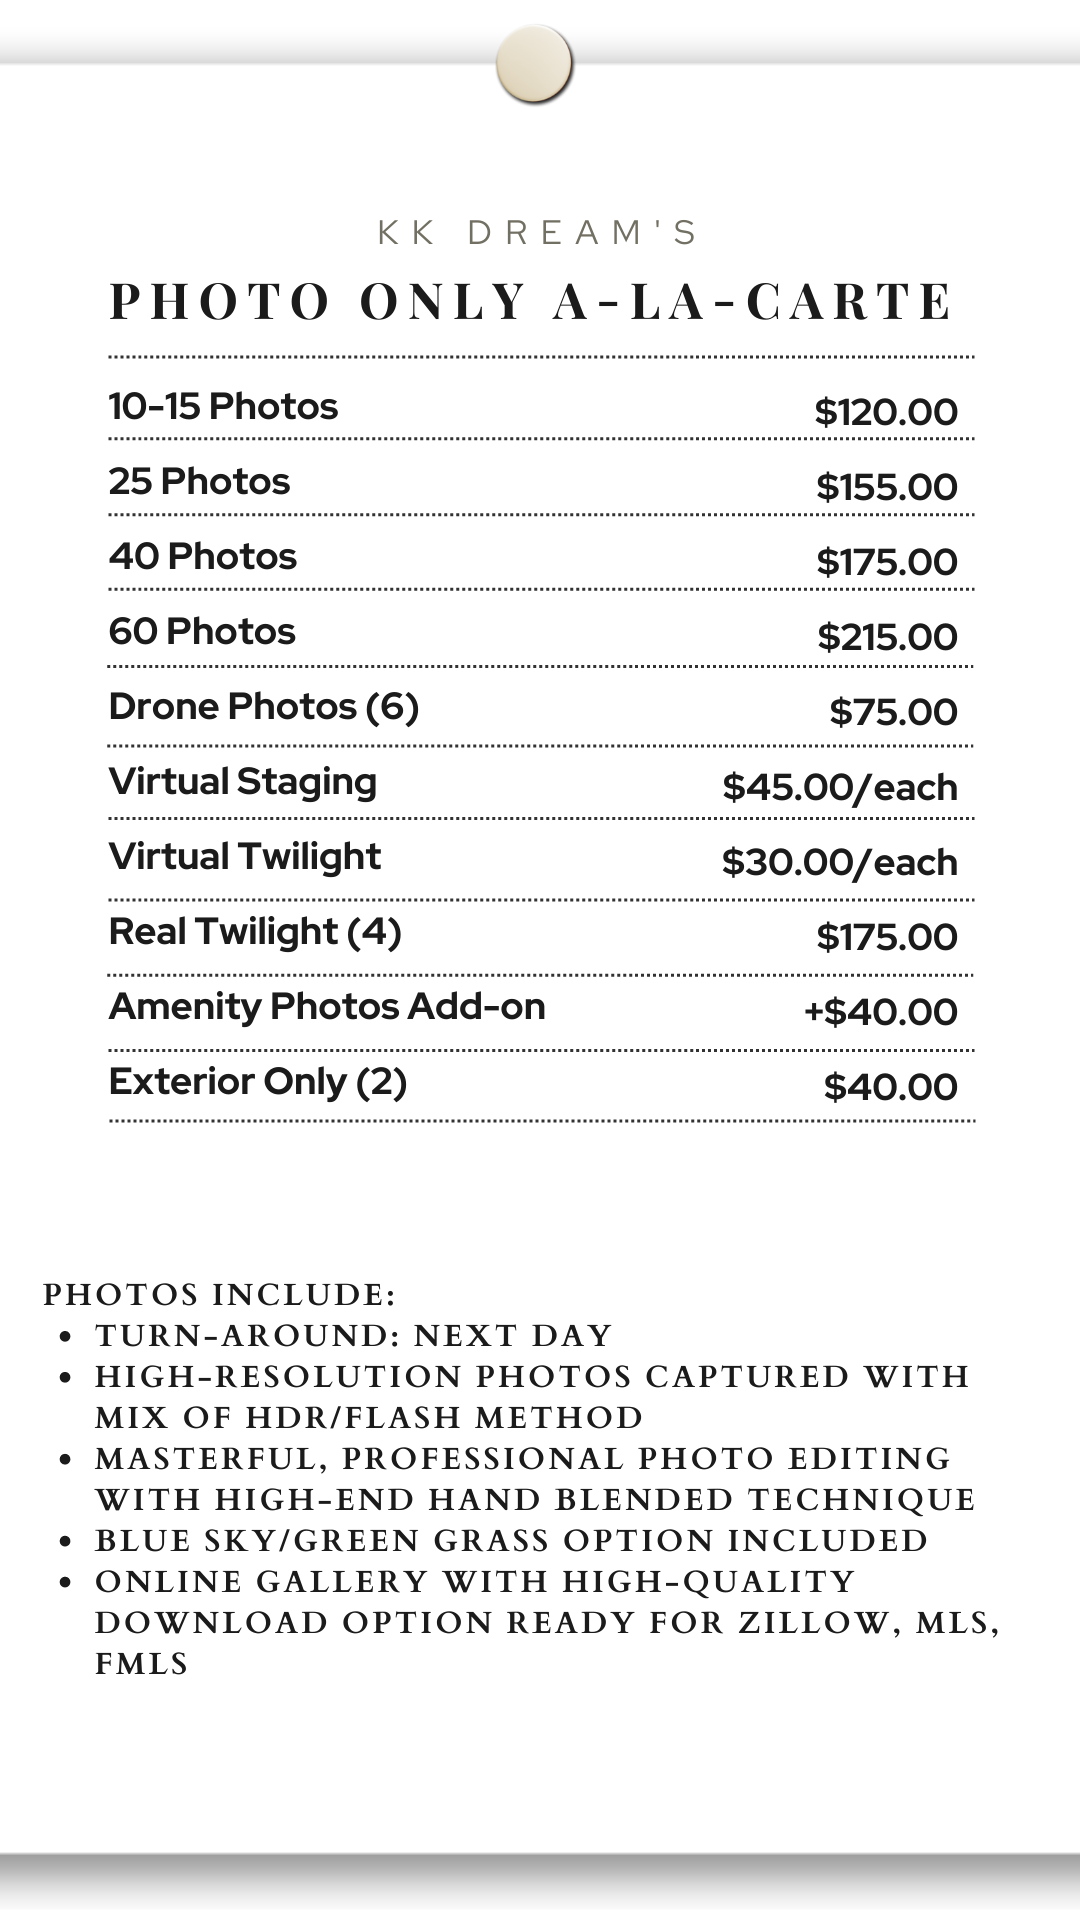 Prices Reformatted (Instagram Story) Without Images